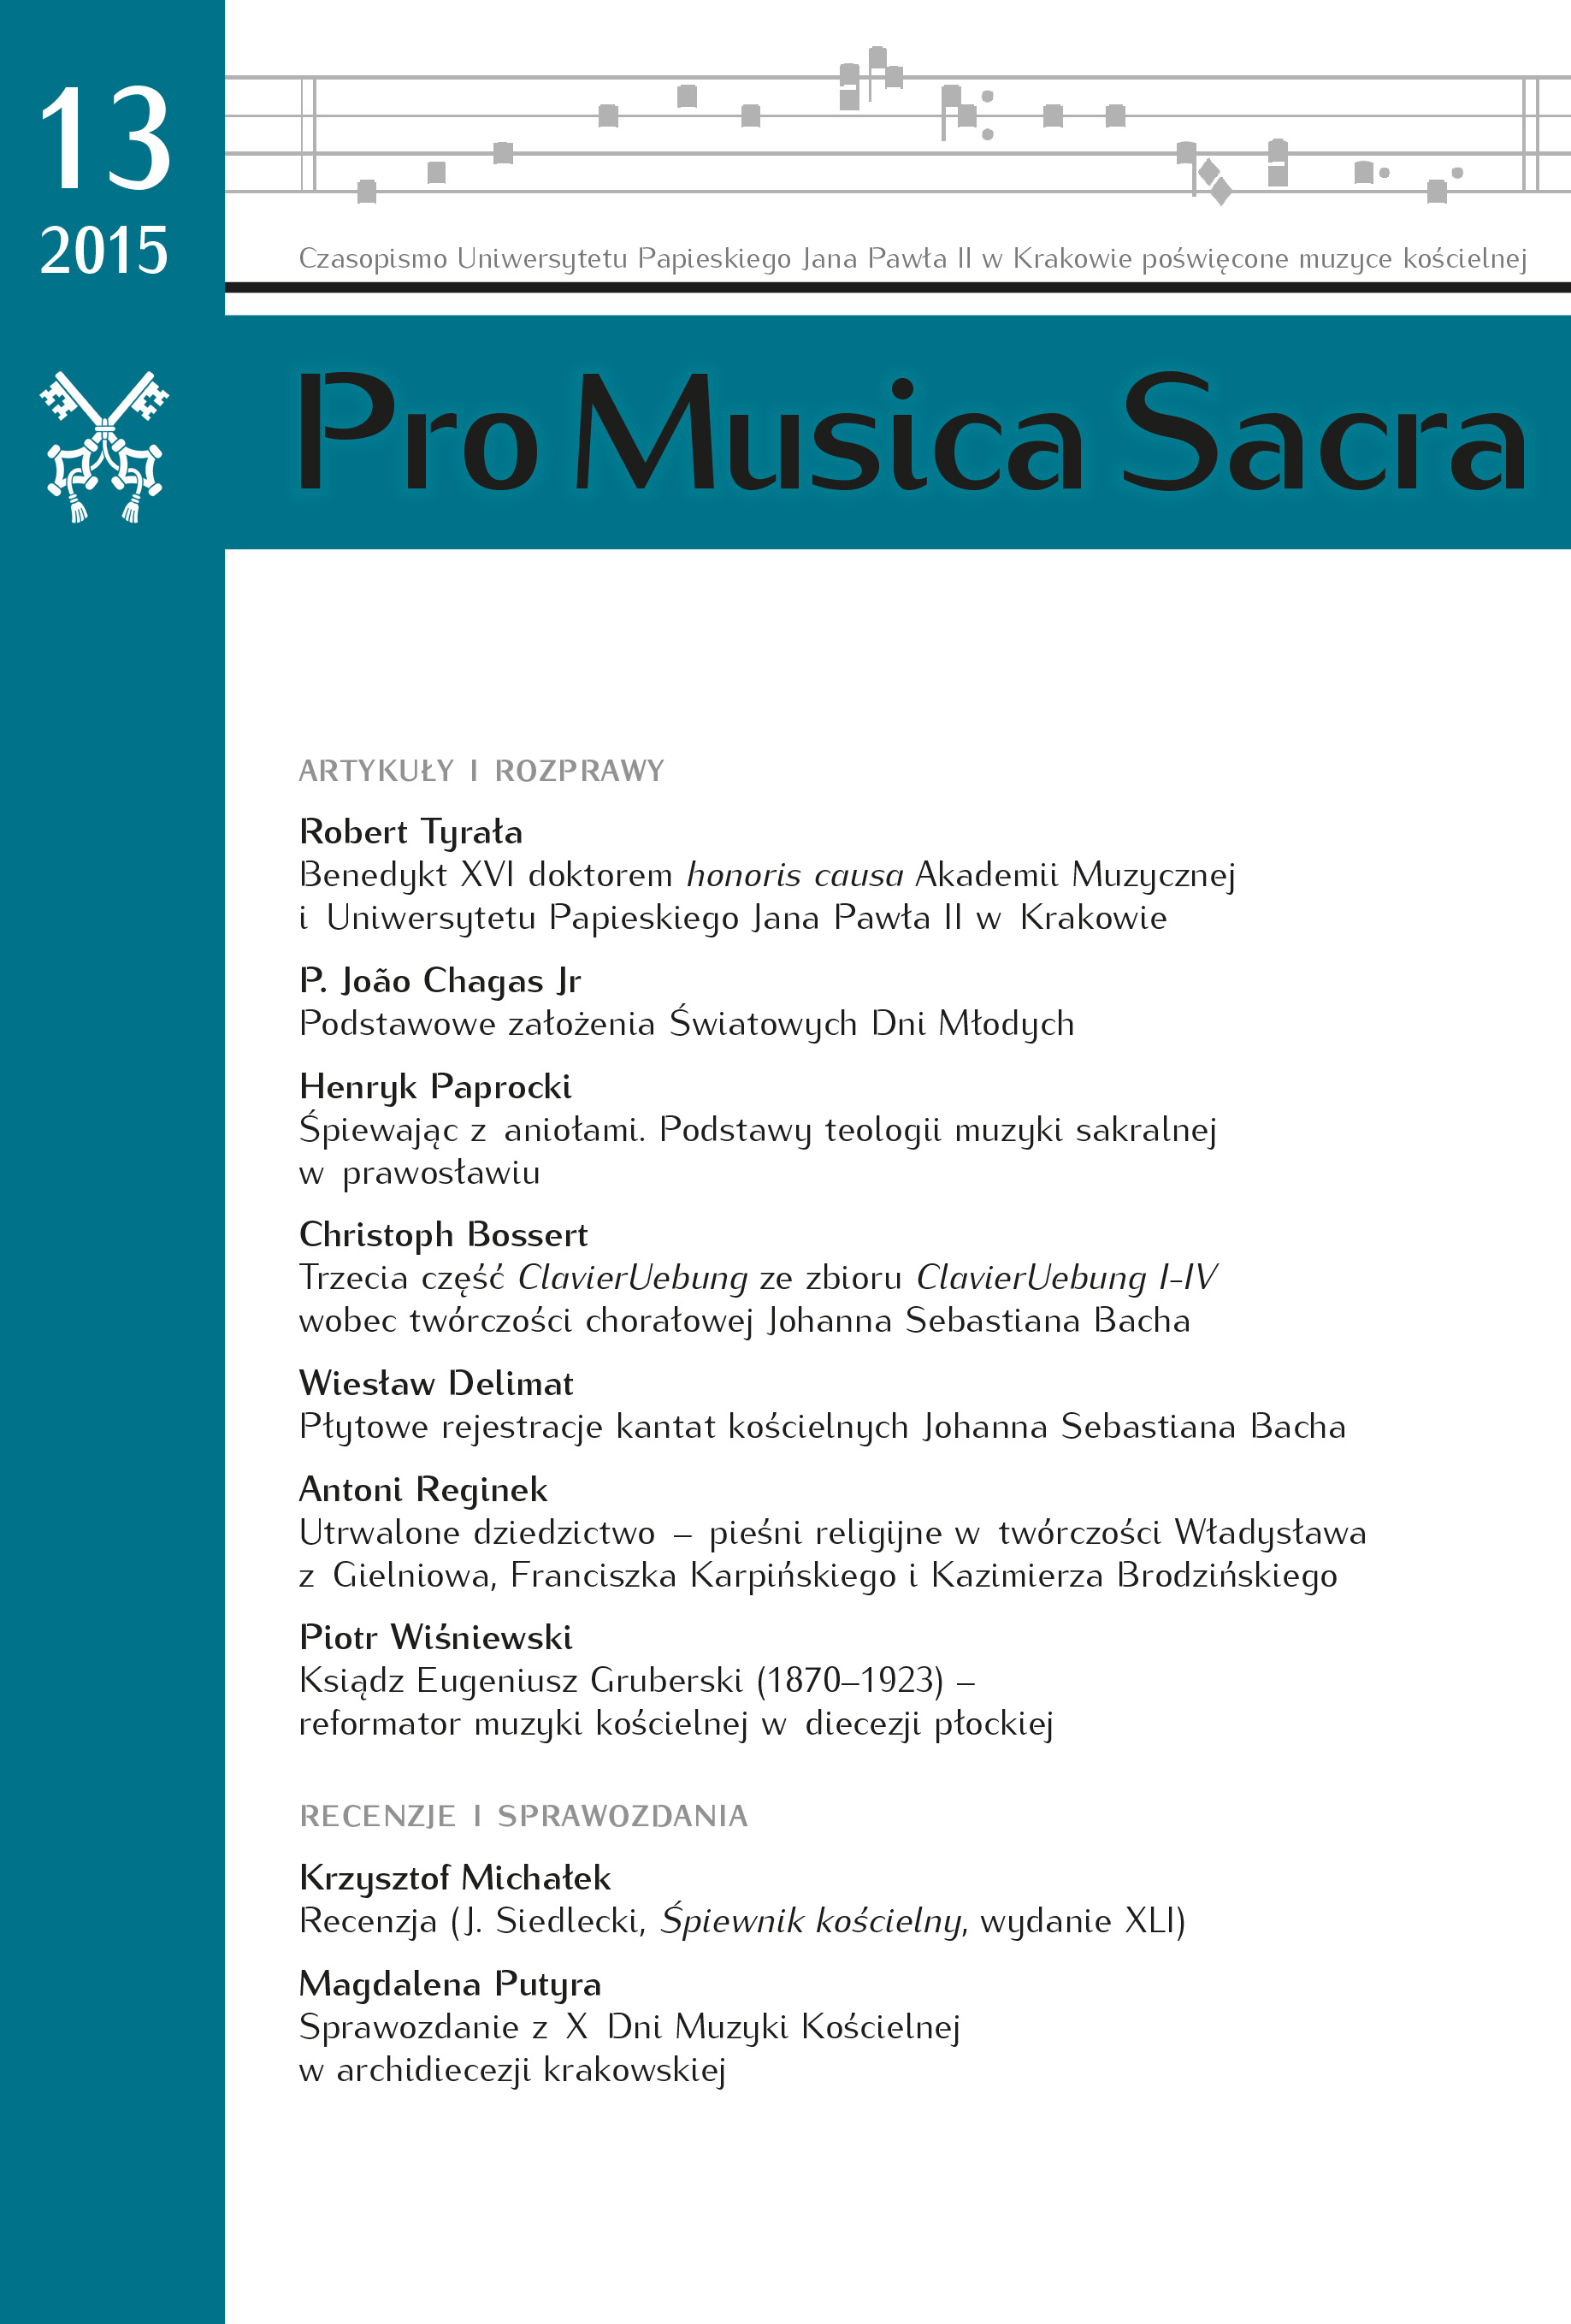 Music or Songs Easy and Fashionable? A View to the Musical Art
in the Liturgy, Based on the Selected Statement of Joseph Ratzinger – Benedict XVI Cover Image